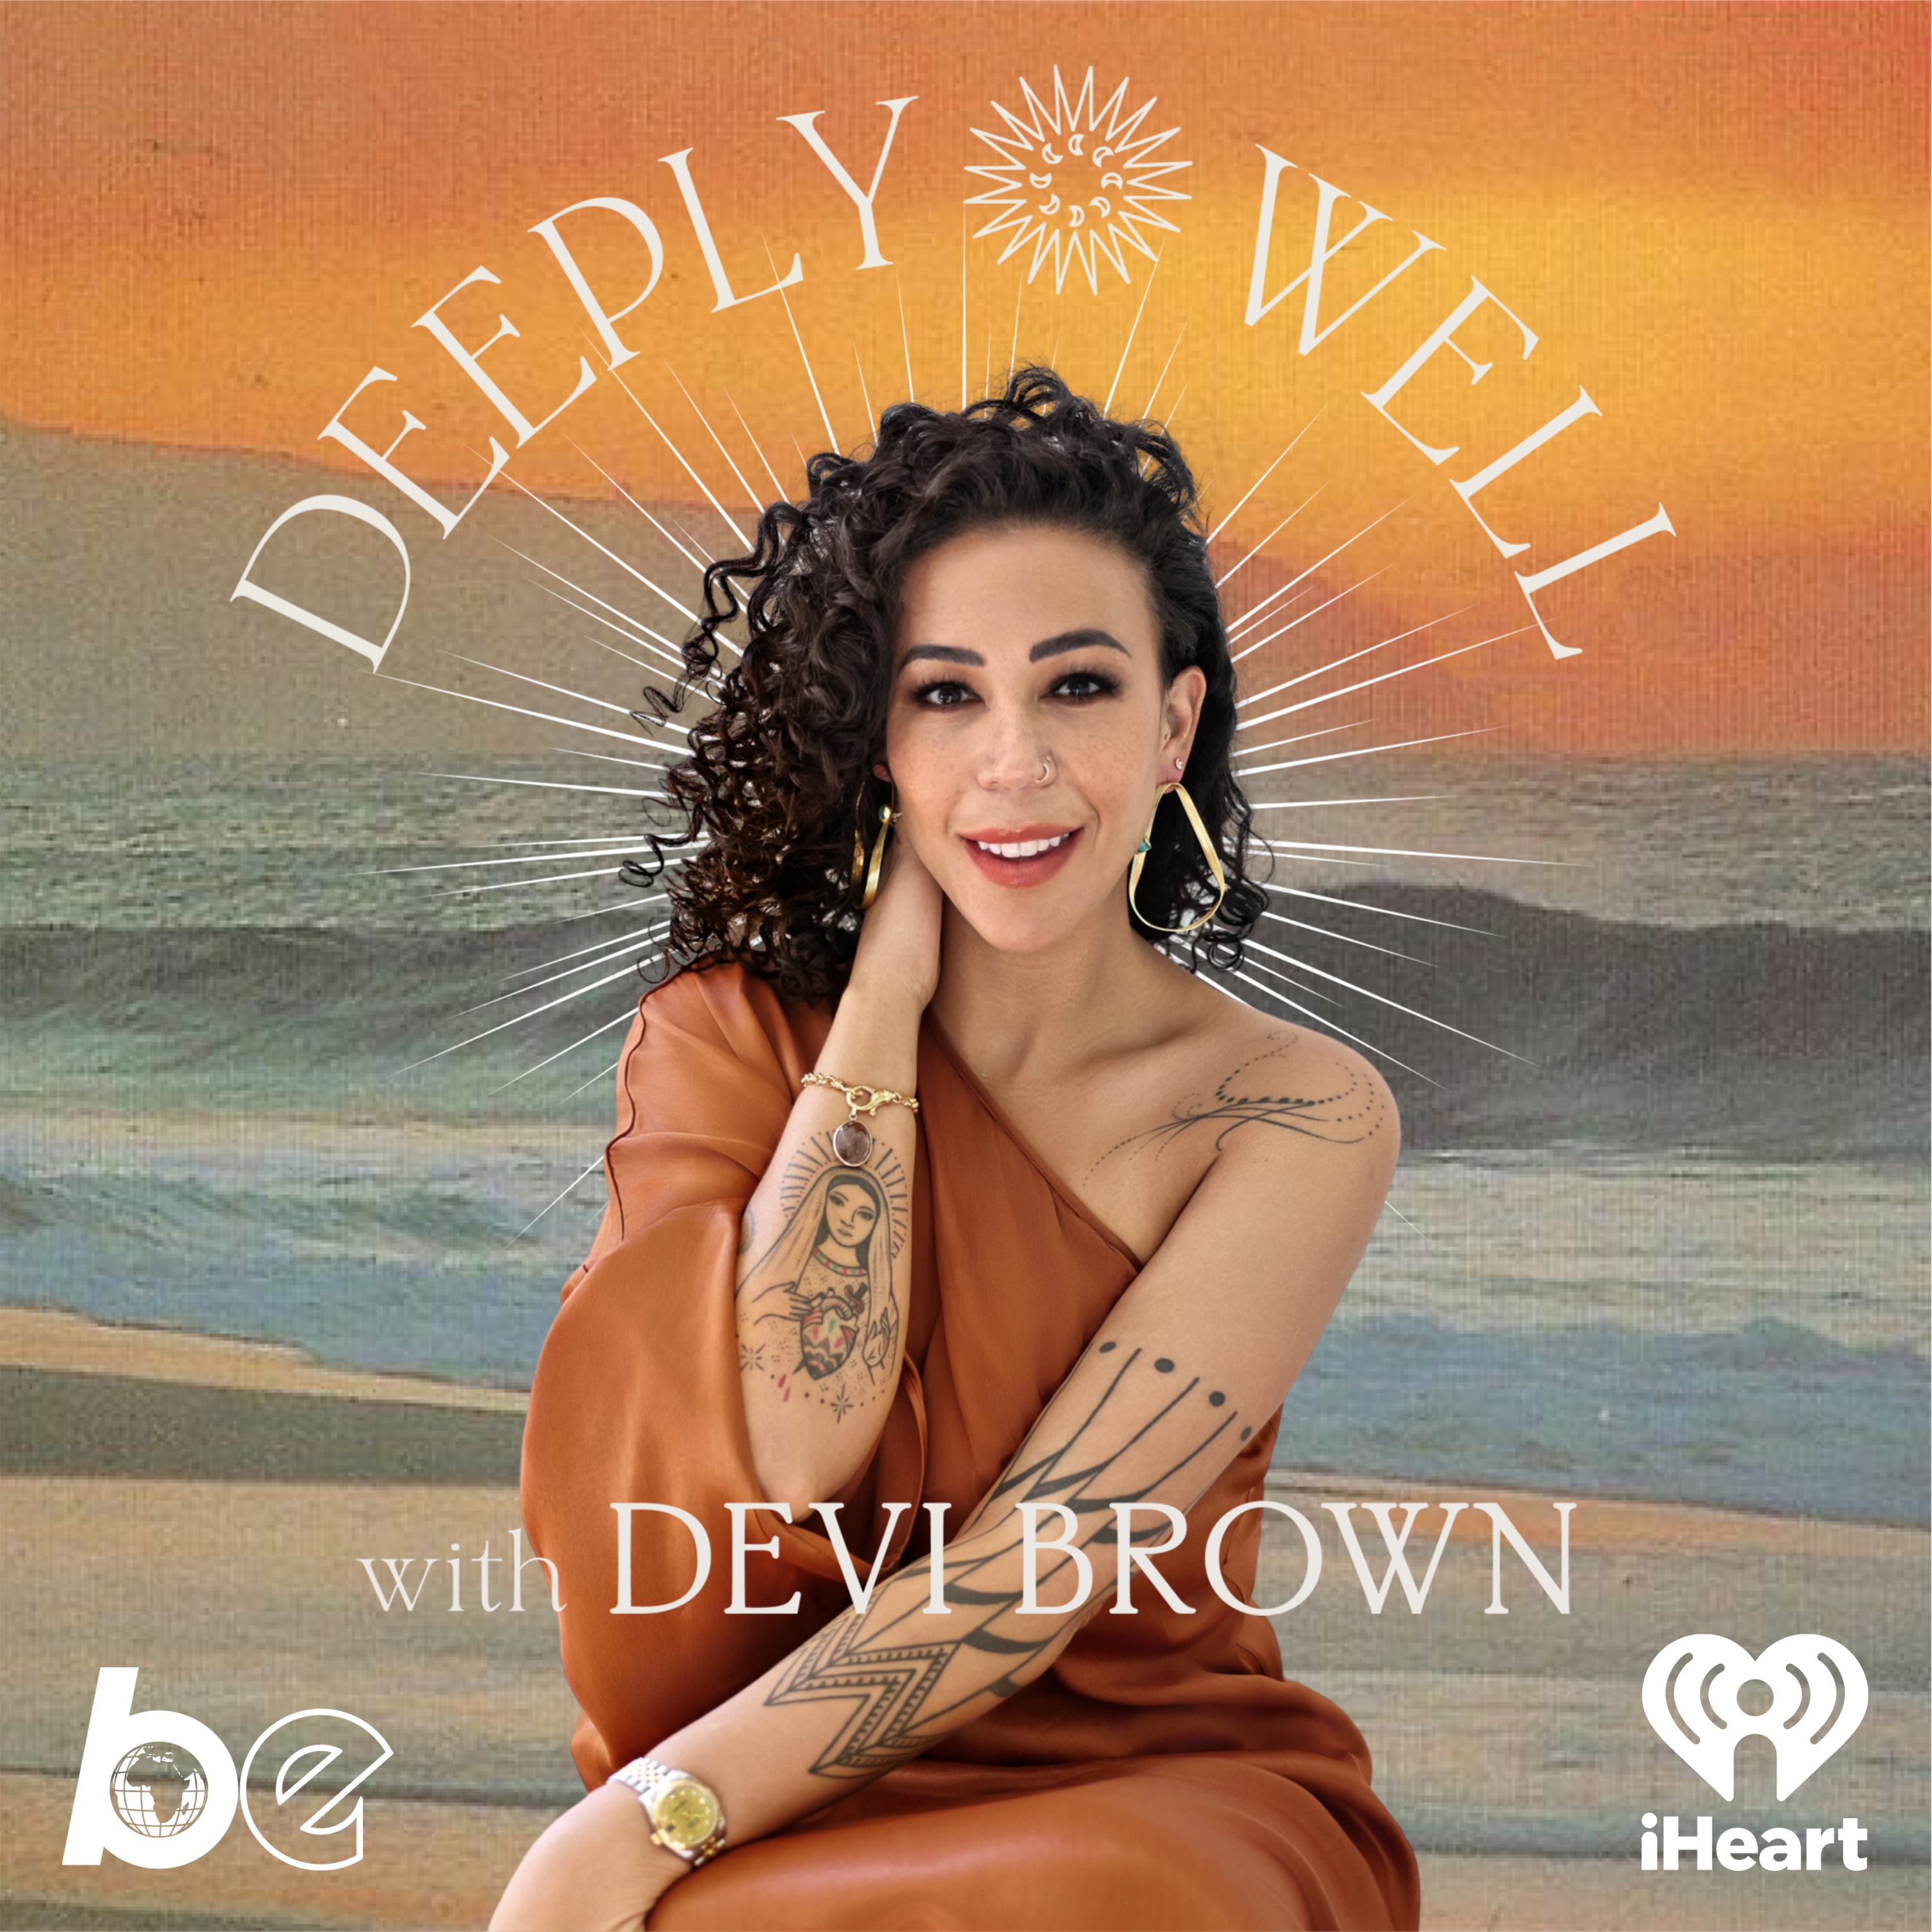 Q & A PART II with Devi Brown